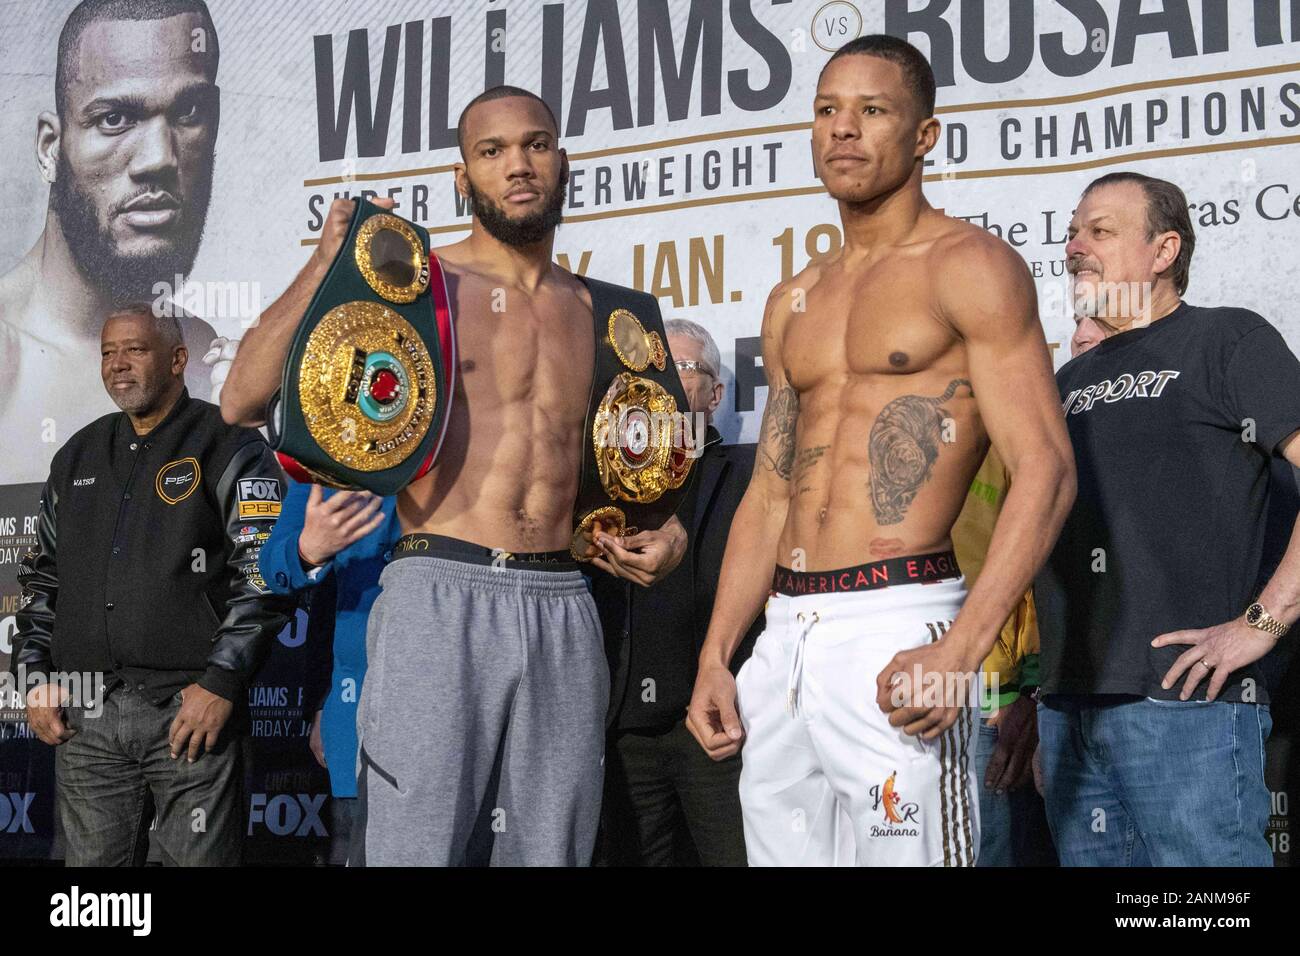 Philadelphia, Pennsylvania, USA. 17th Jan, 2020. Boxing WBA, IBF, super  welterweight champion, JULIAN WILLIAMS, and challenger, JEISON ROSARIO,  stare down at the premier boxing champions pre fight weigh- in held at the